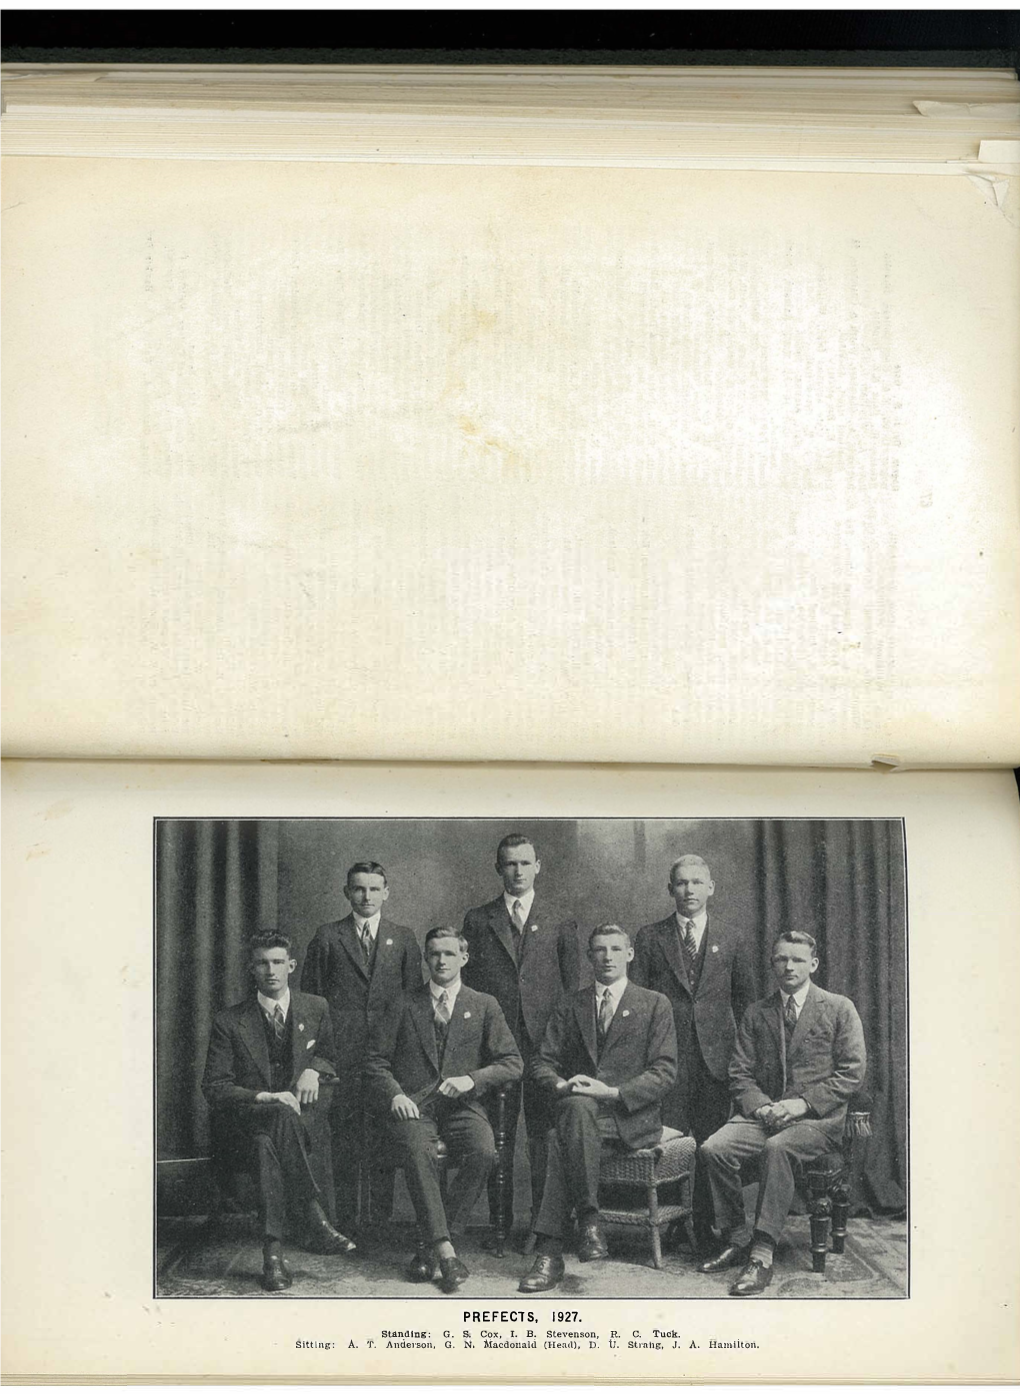 Prefects, 1927